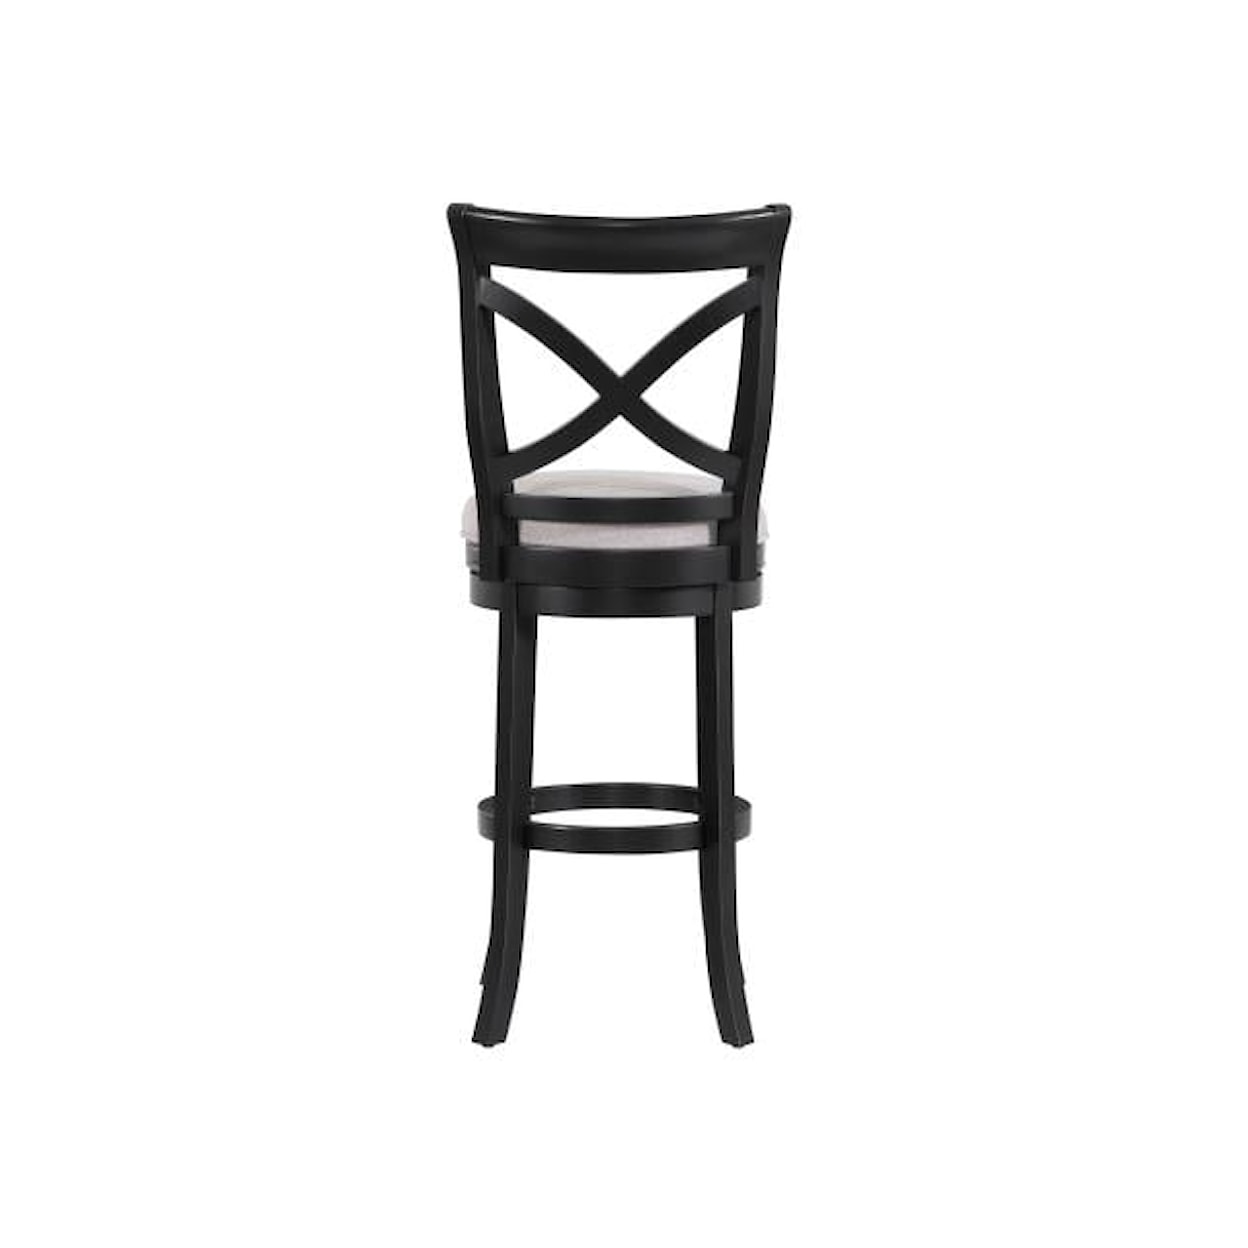 American Woodcrafters Wood Frame Barstools X-Back Black Wooden Counter Stool